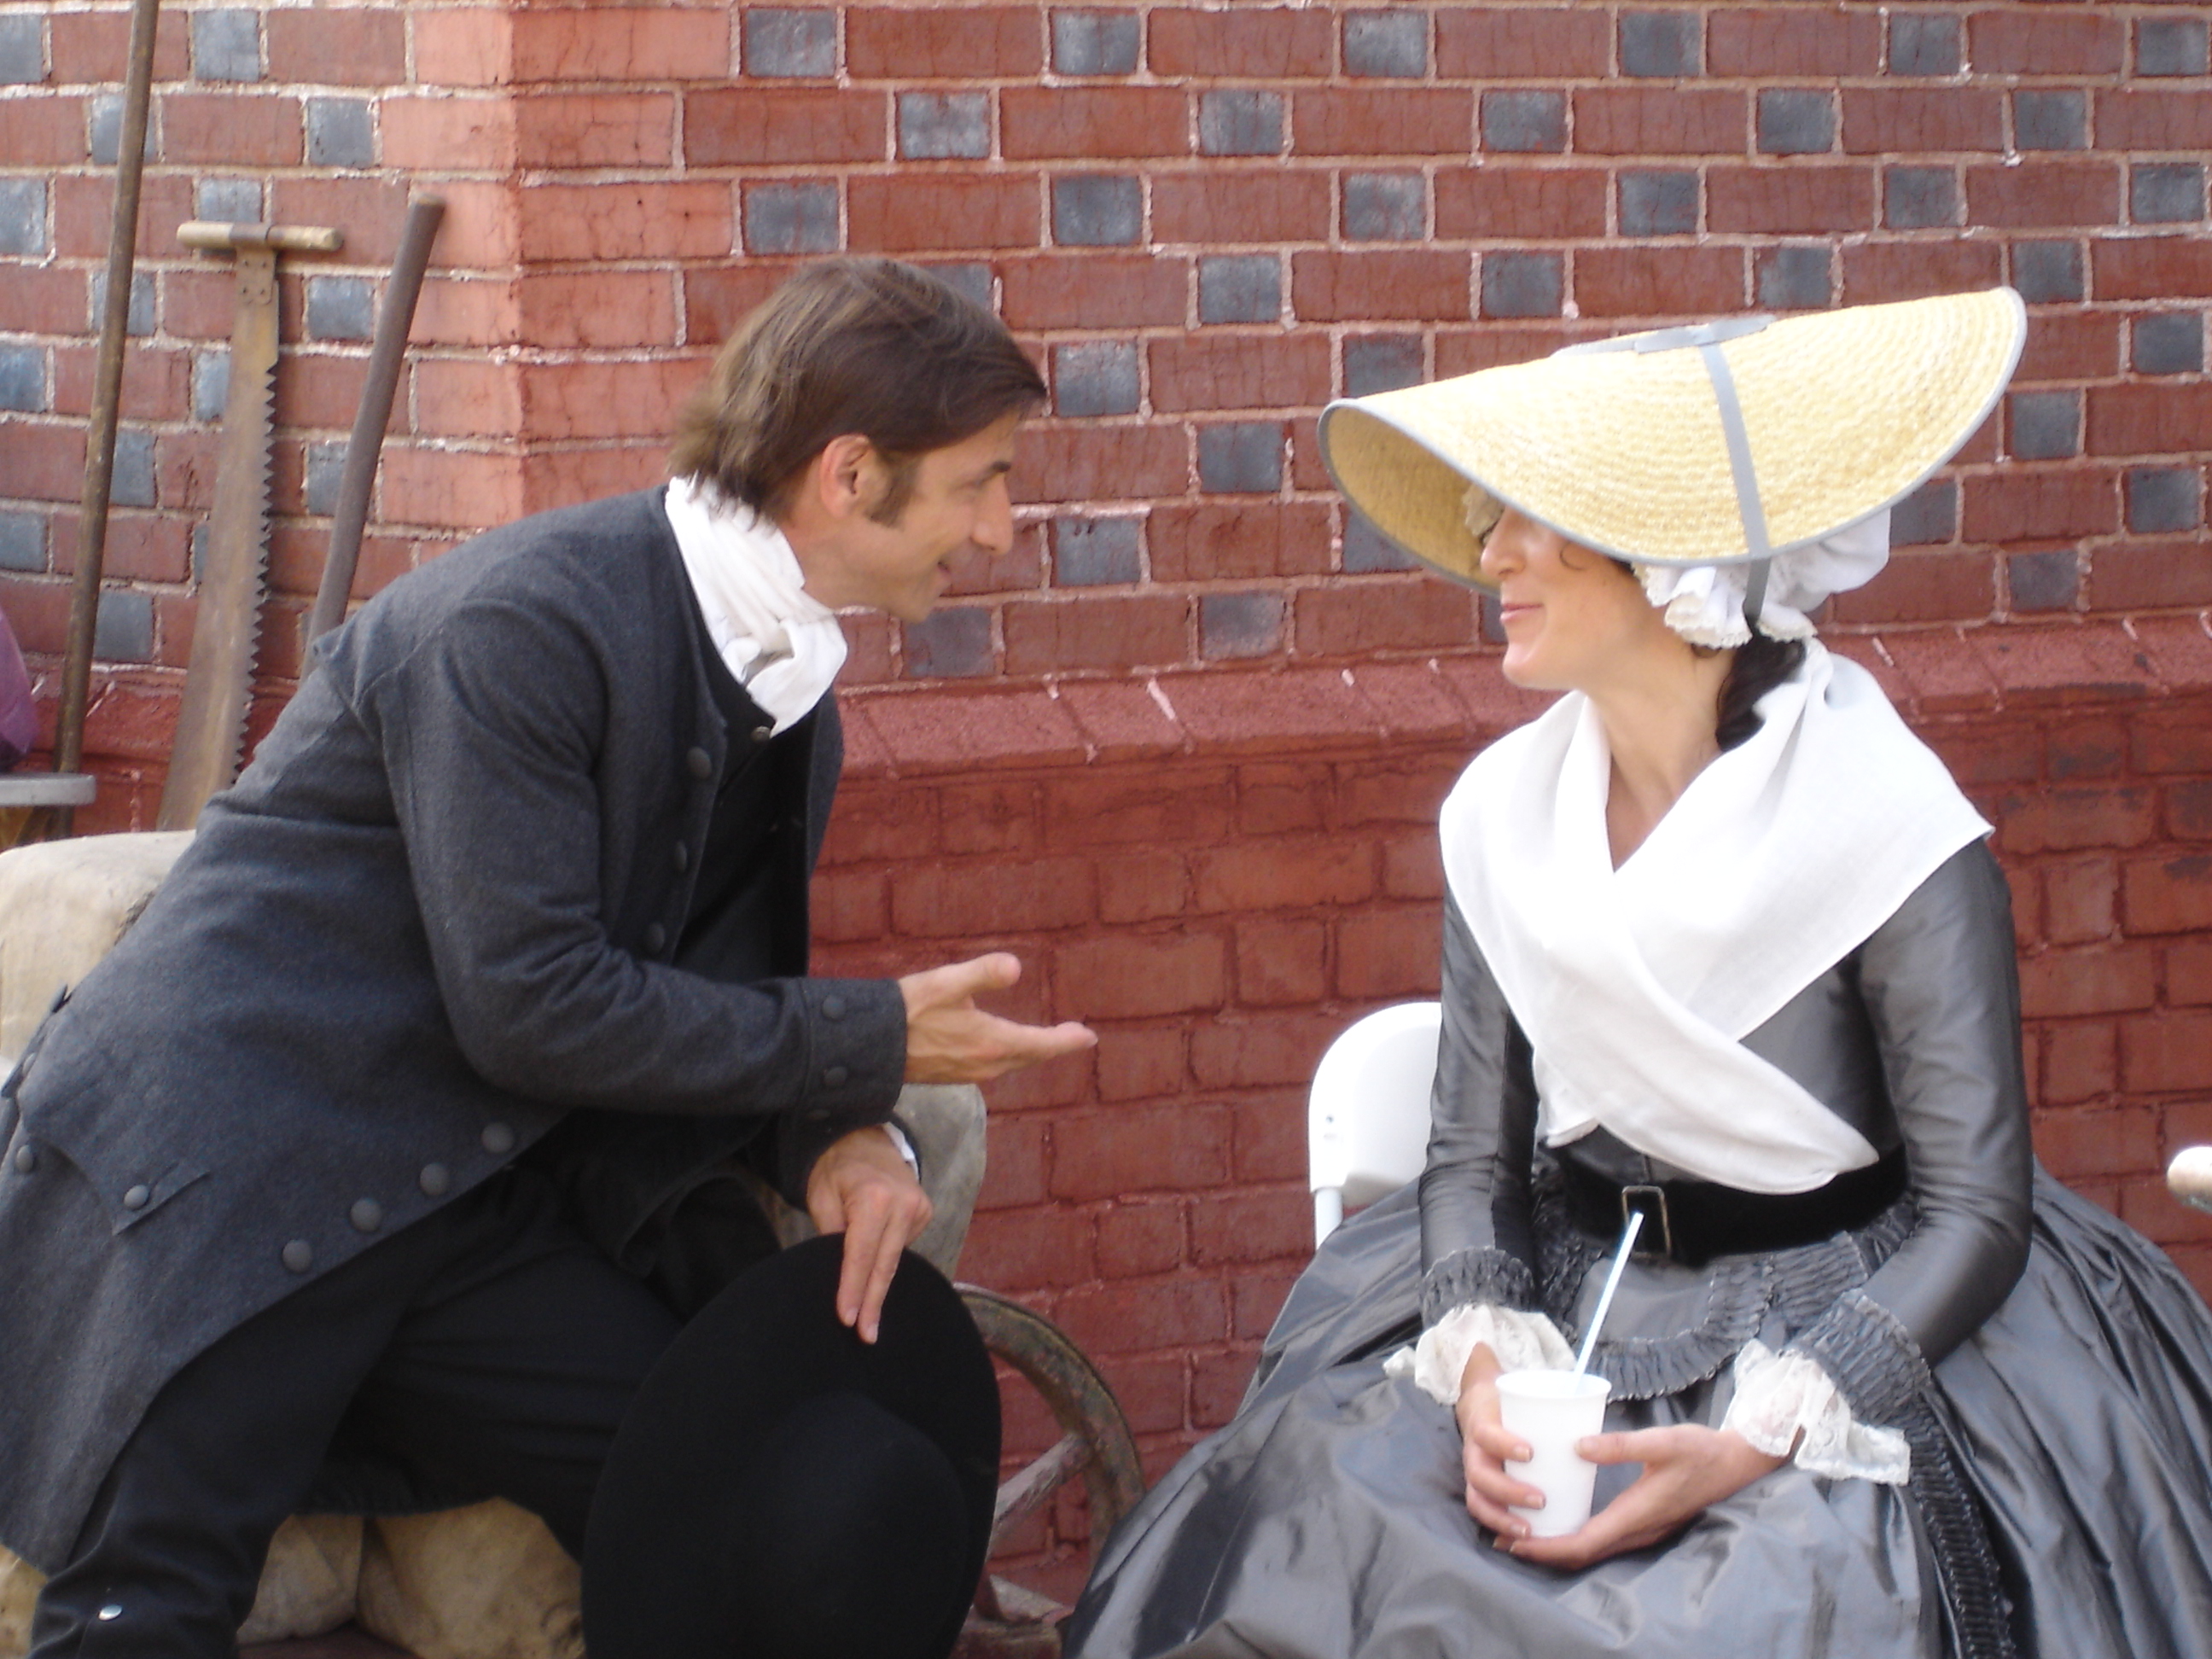 Ethan Marten and Eve Best on set of Dolley Madison.